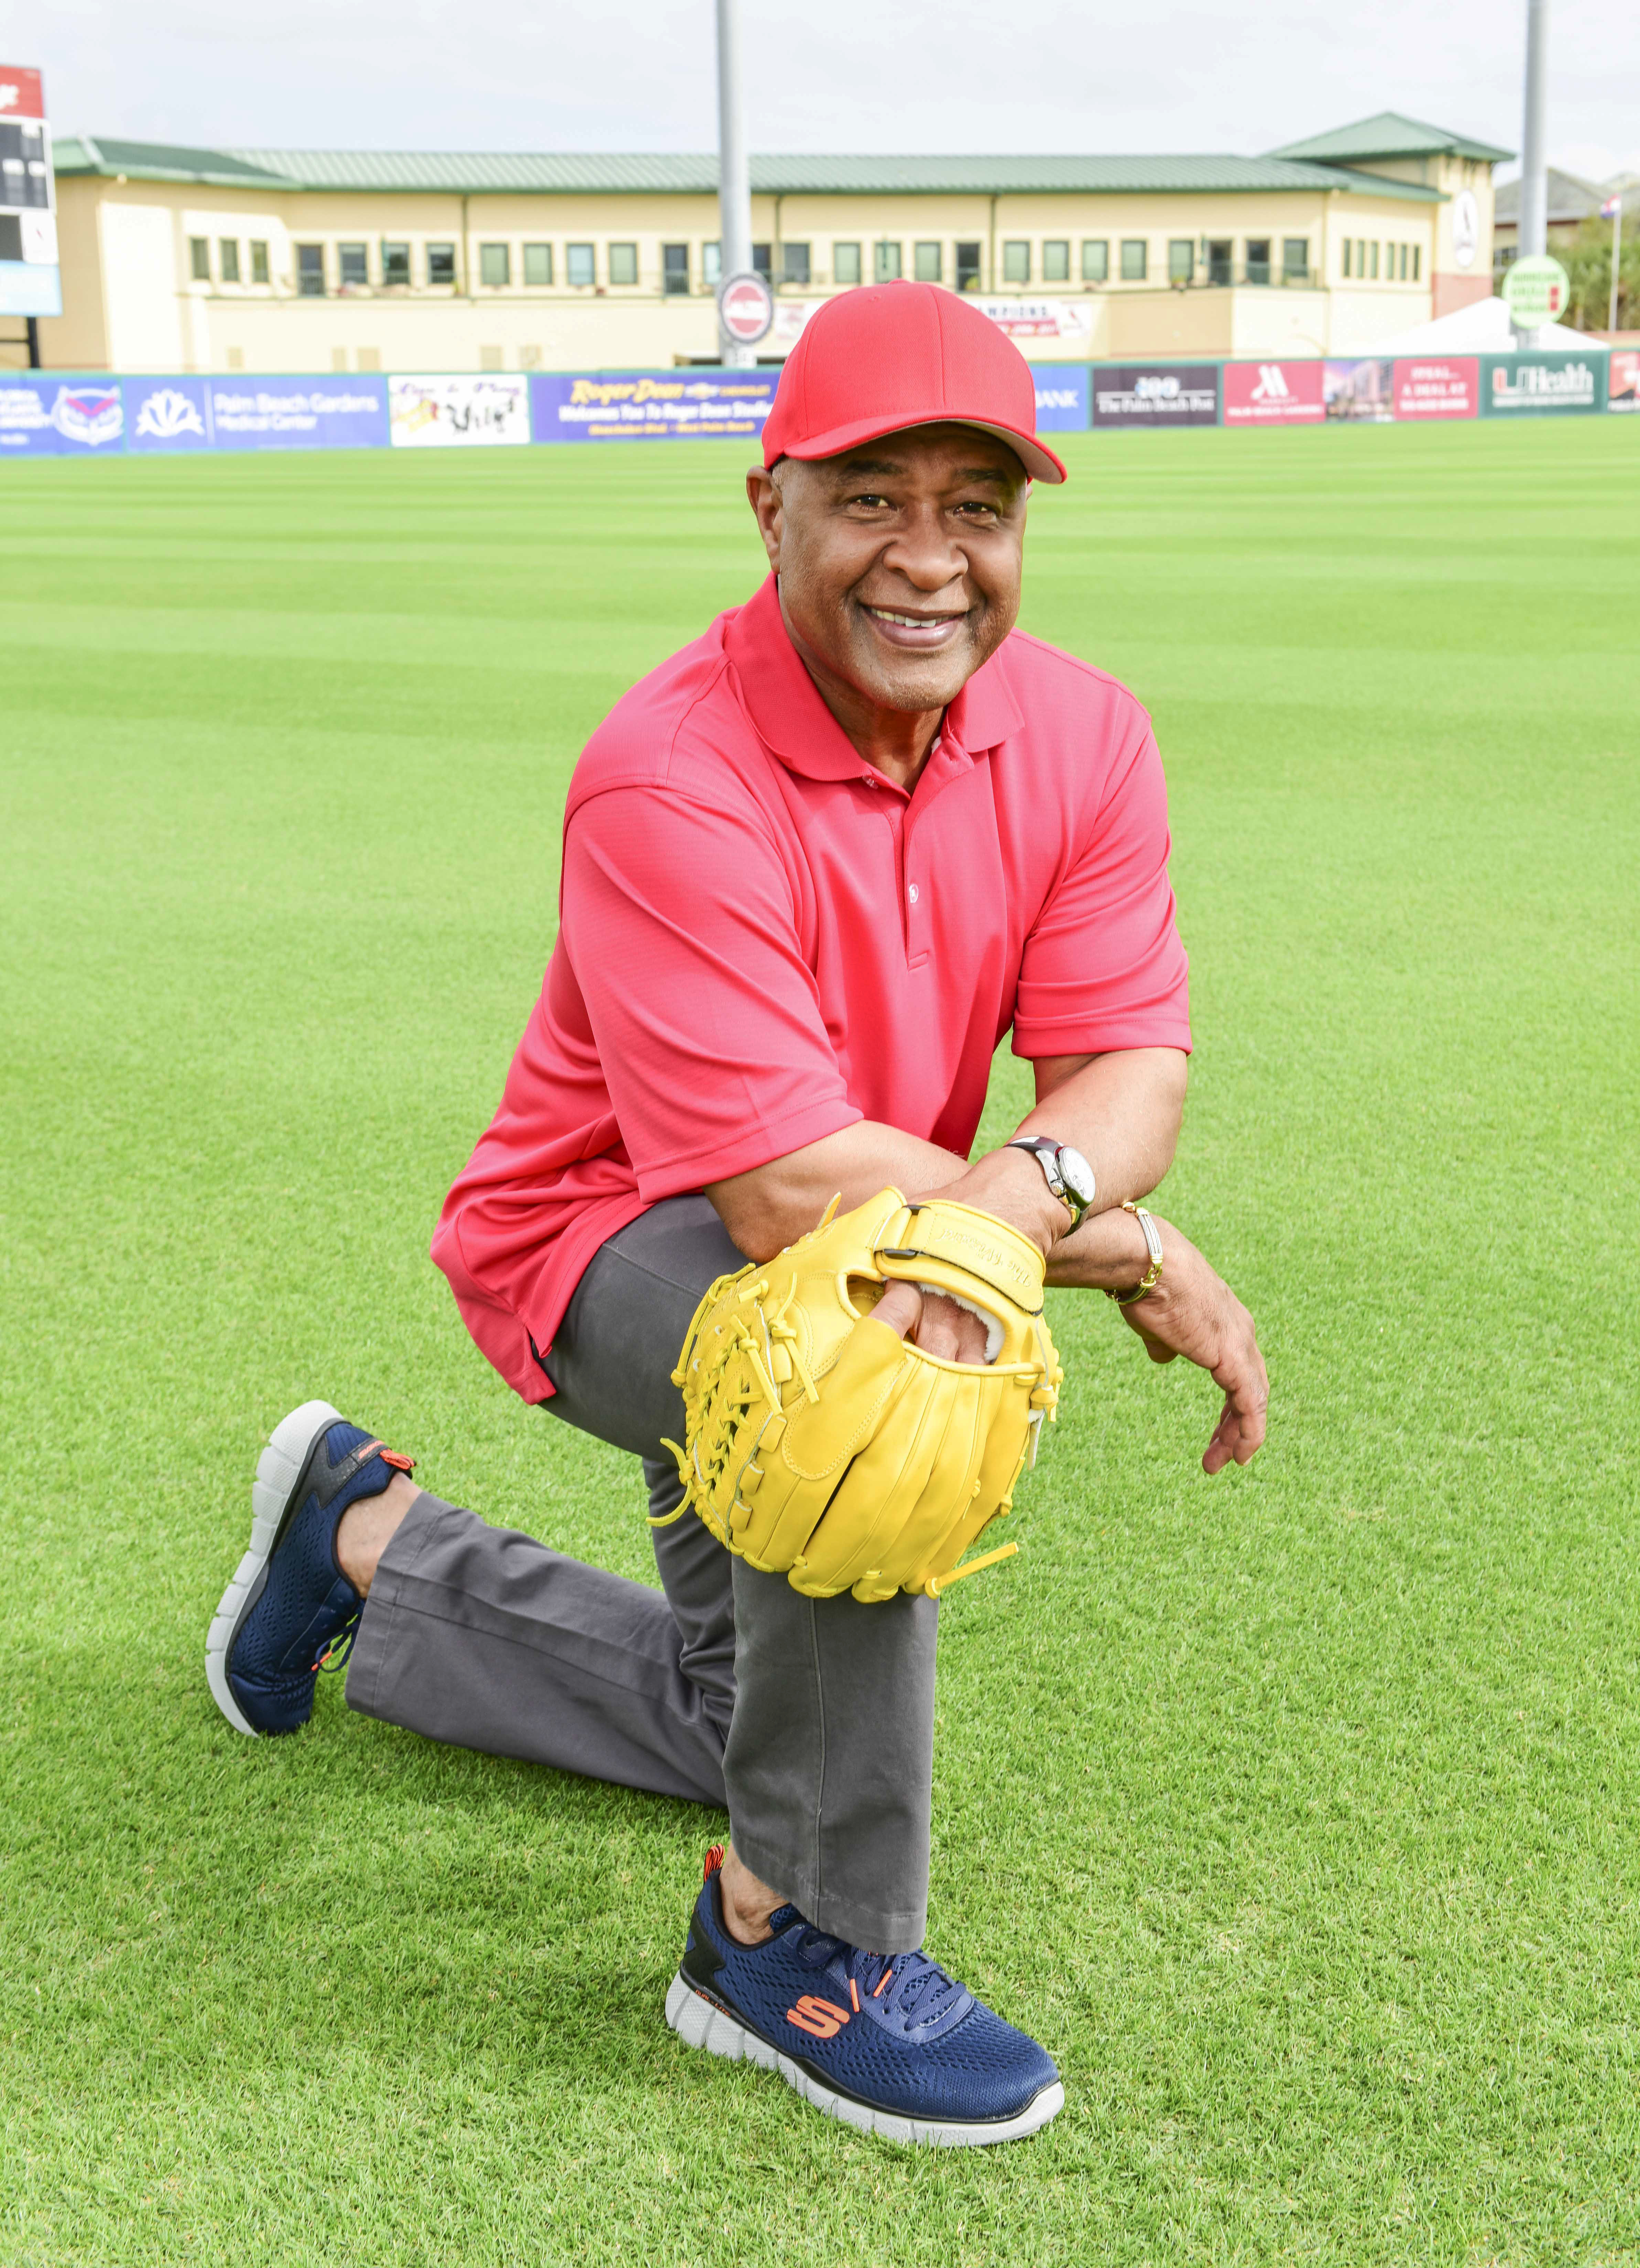 Baseball Legend Ozzie Smith Teams Up with Skechers